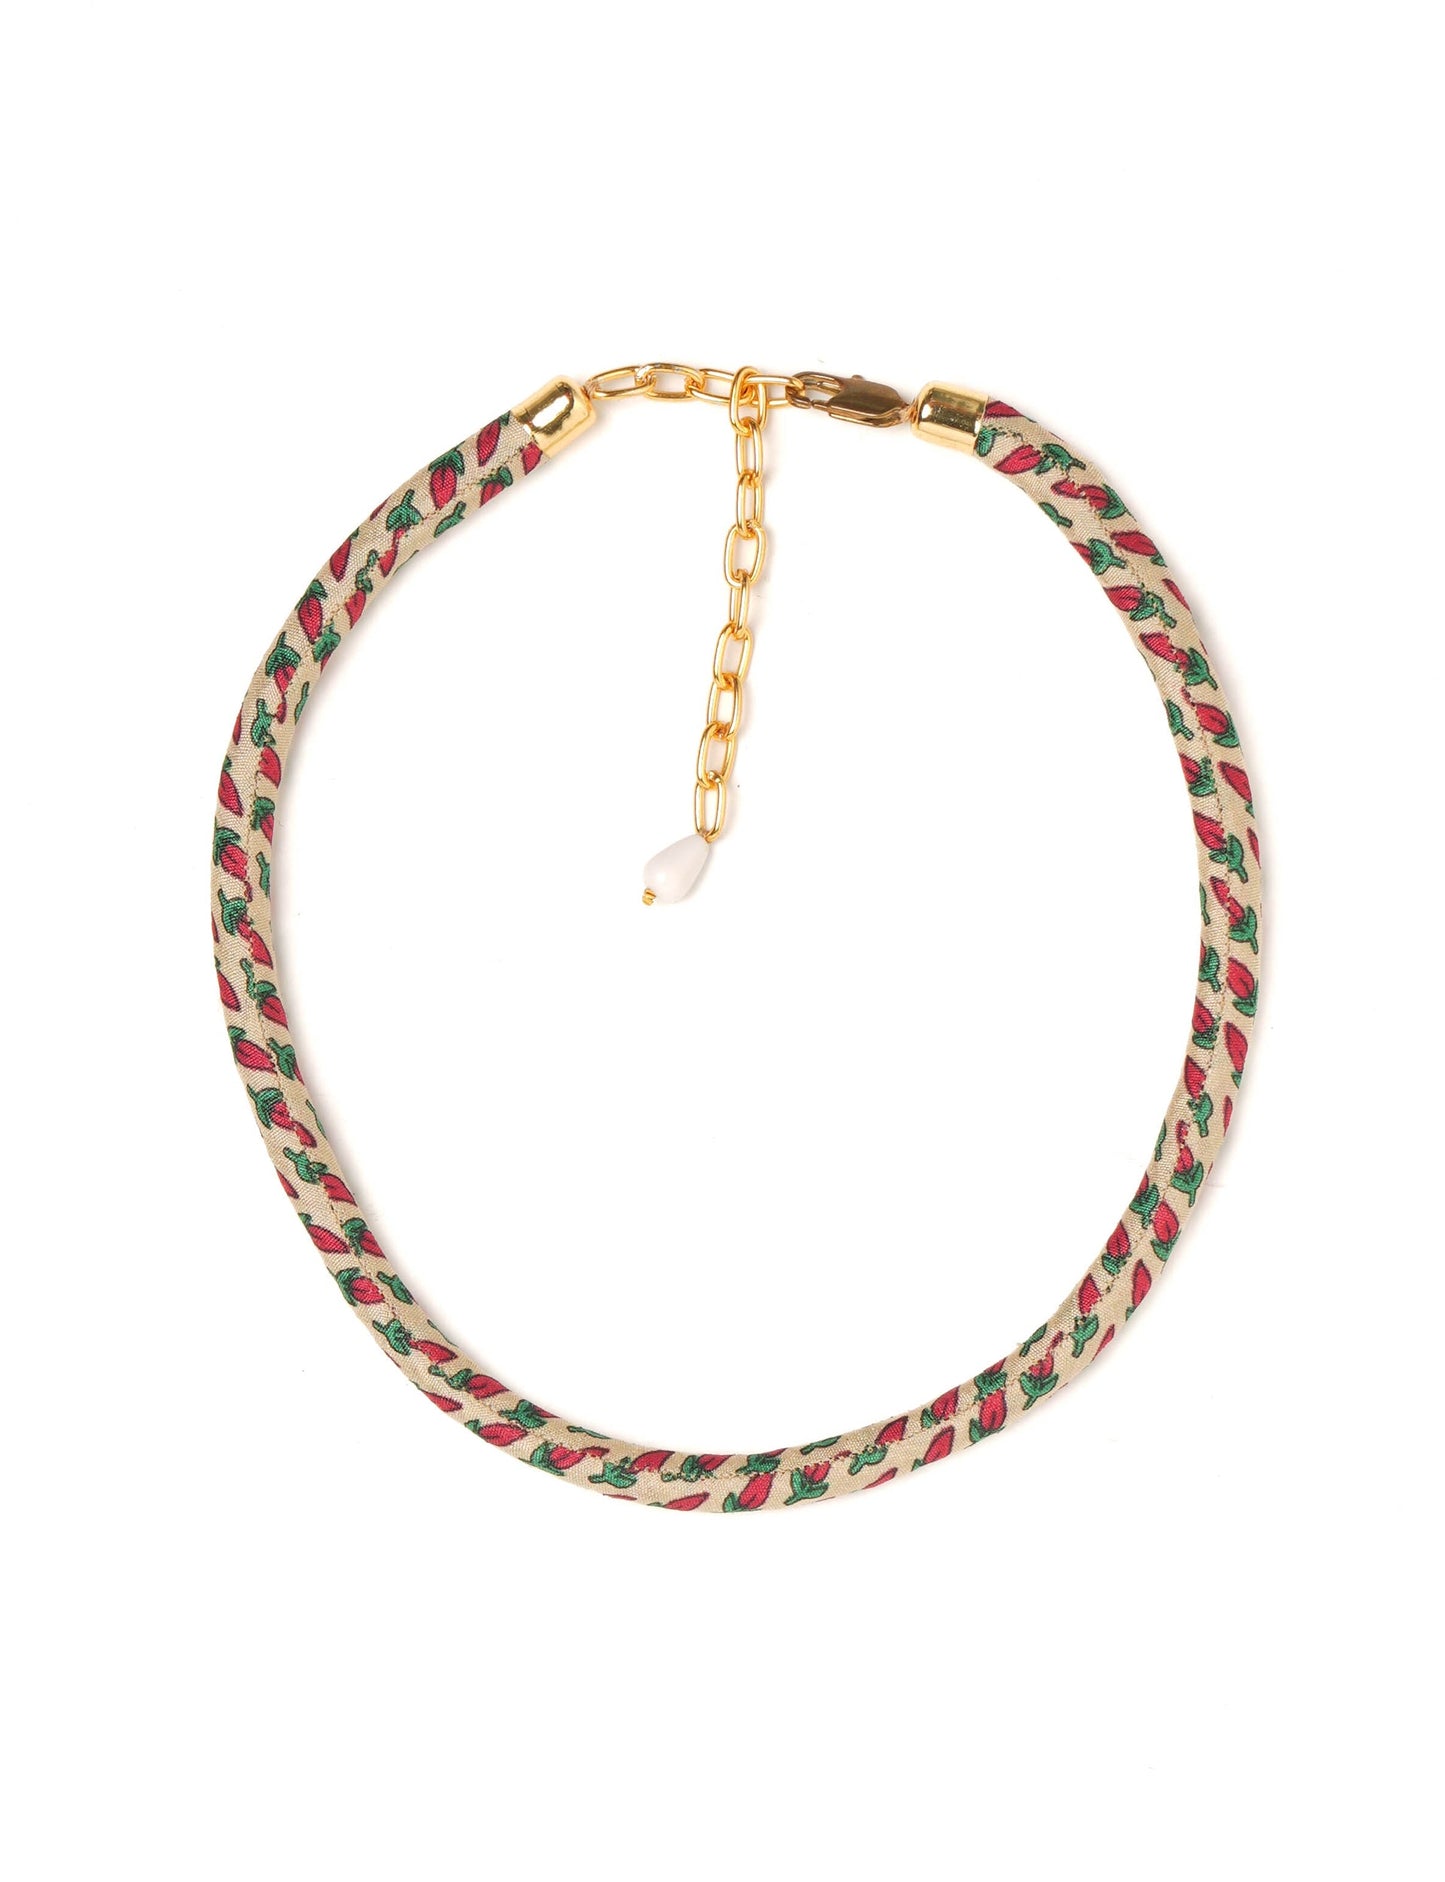 Elevate your look sustainably with our Rope Necklace. Crafted using cotton rope hand-wrapped with pre-loved Indian saris, this necklace is a testament to ethical and green fashion. Make a conscious choice for a brighter, eco-friendly future with this unique, upcycled accessory.